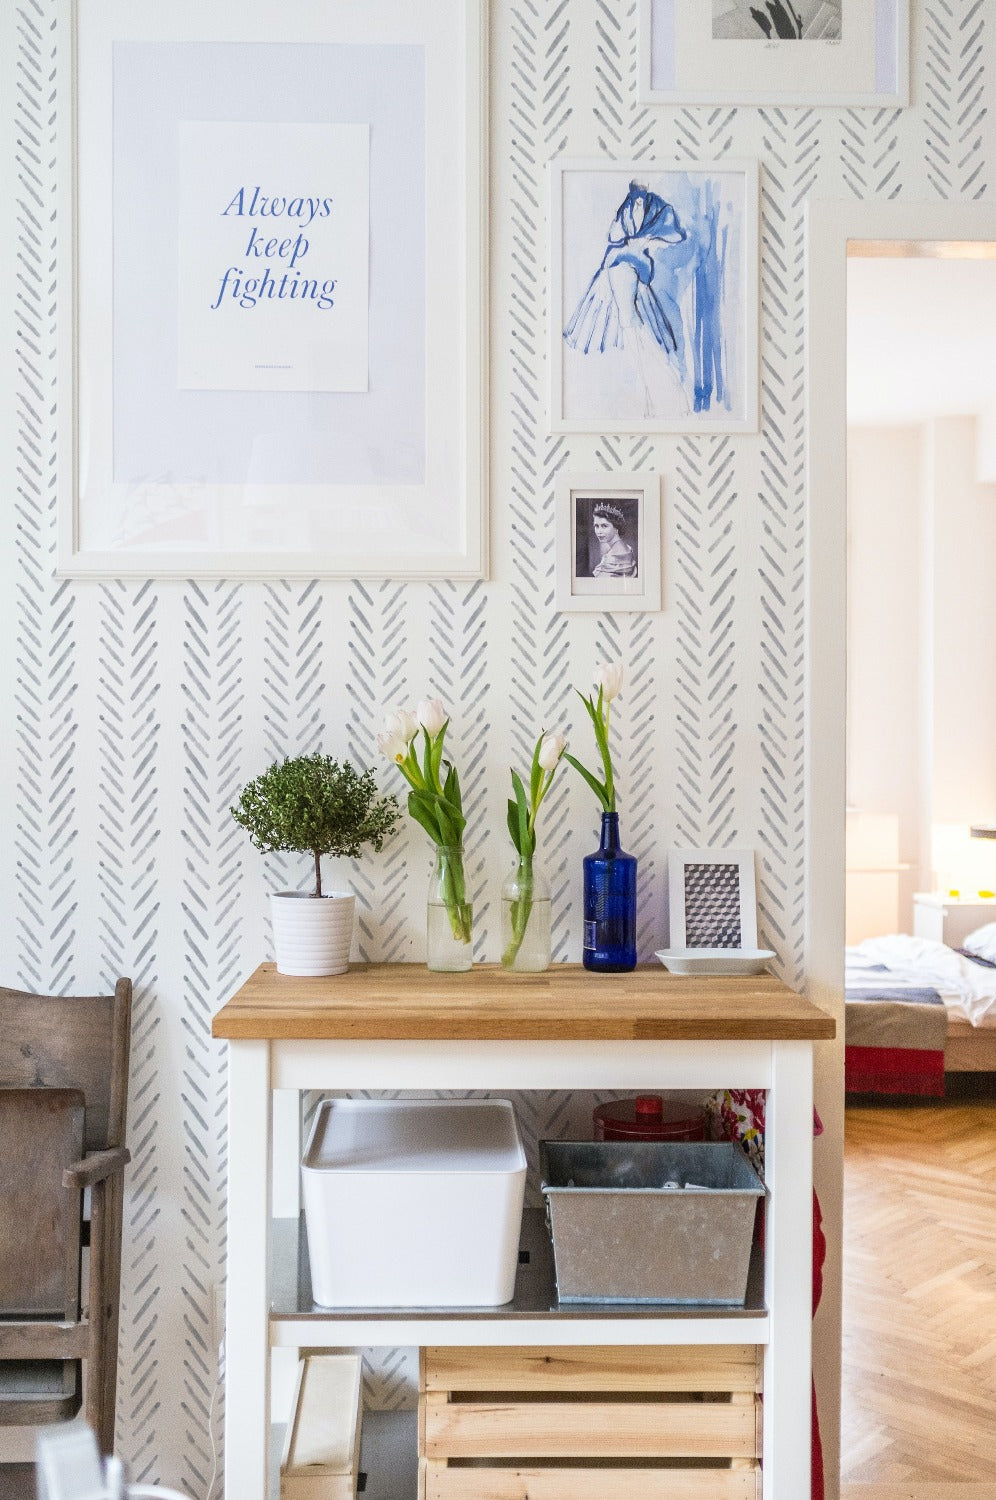 Eclectic workspace with Hand Painted Chevron Wallpaper, featuring a collection of framed prints, fresh flowers, and a wooden shelf with storage boxes.